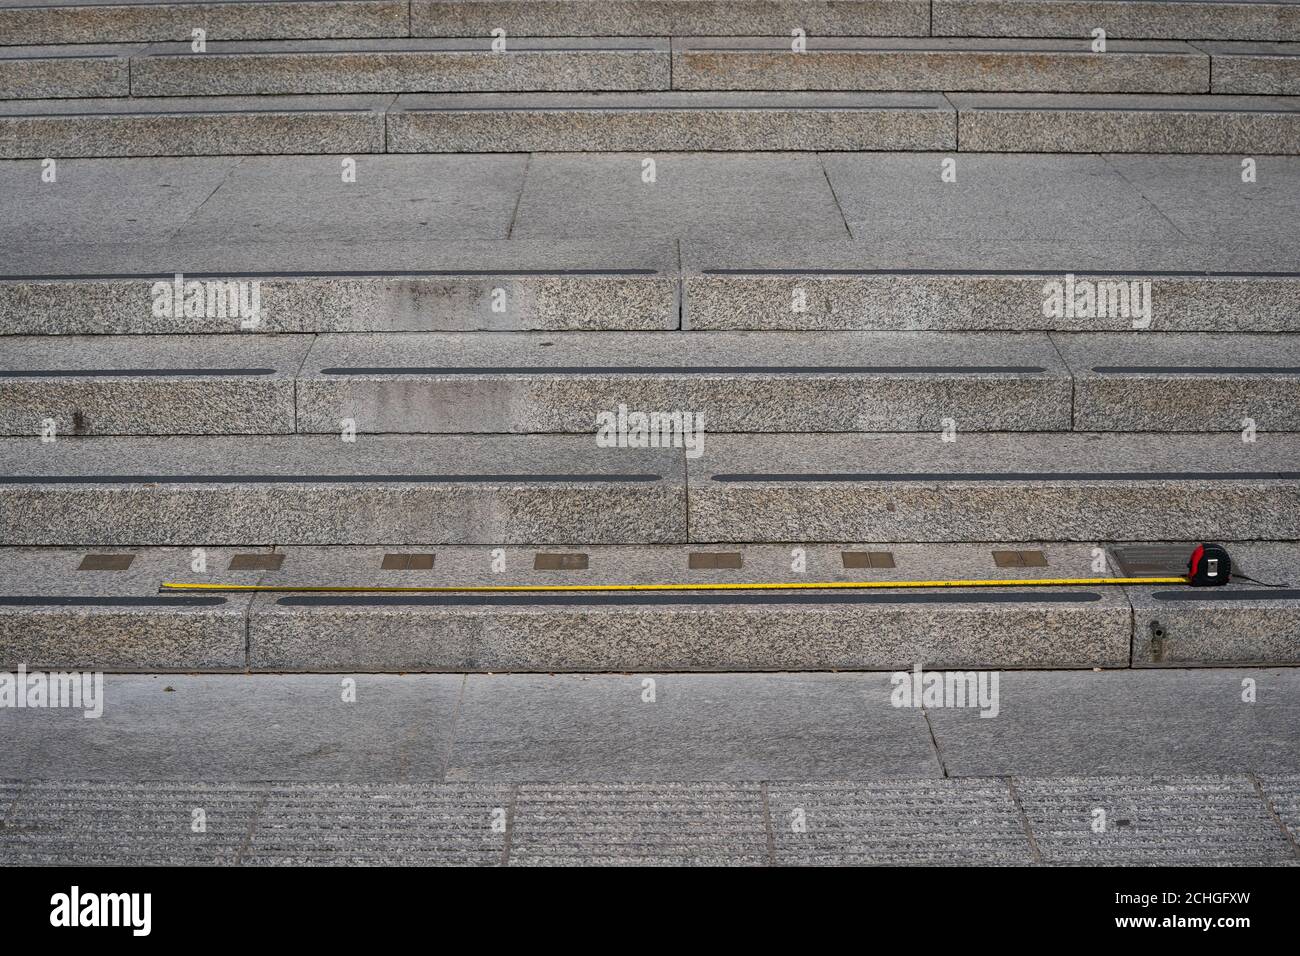 A tape measure is placed against the Imperial measurement markers embedded on the steps leading up to the National Portrait Gallery at Trafalgar Square in London as the UK continues in lockdown to help curb the spread of the coronavirus. Stock Photo